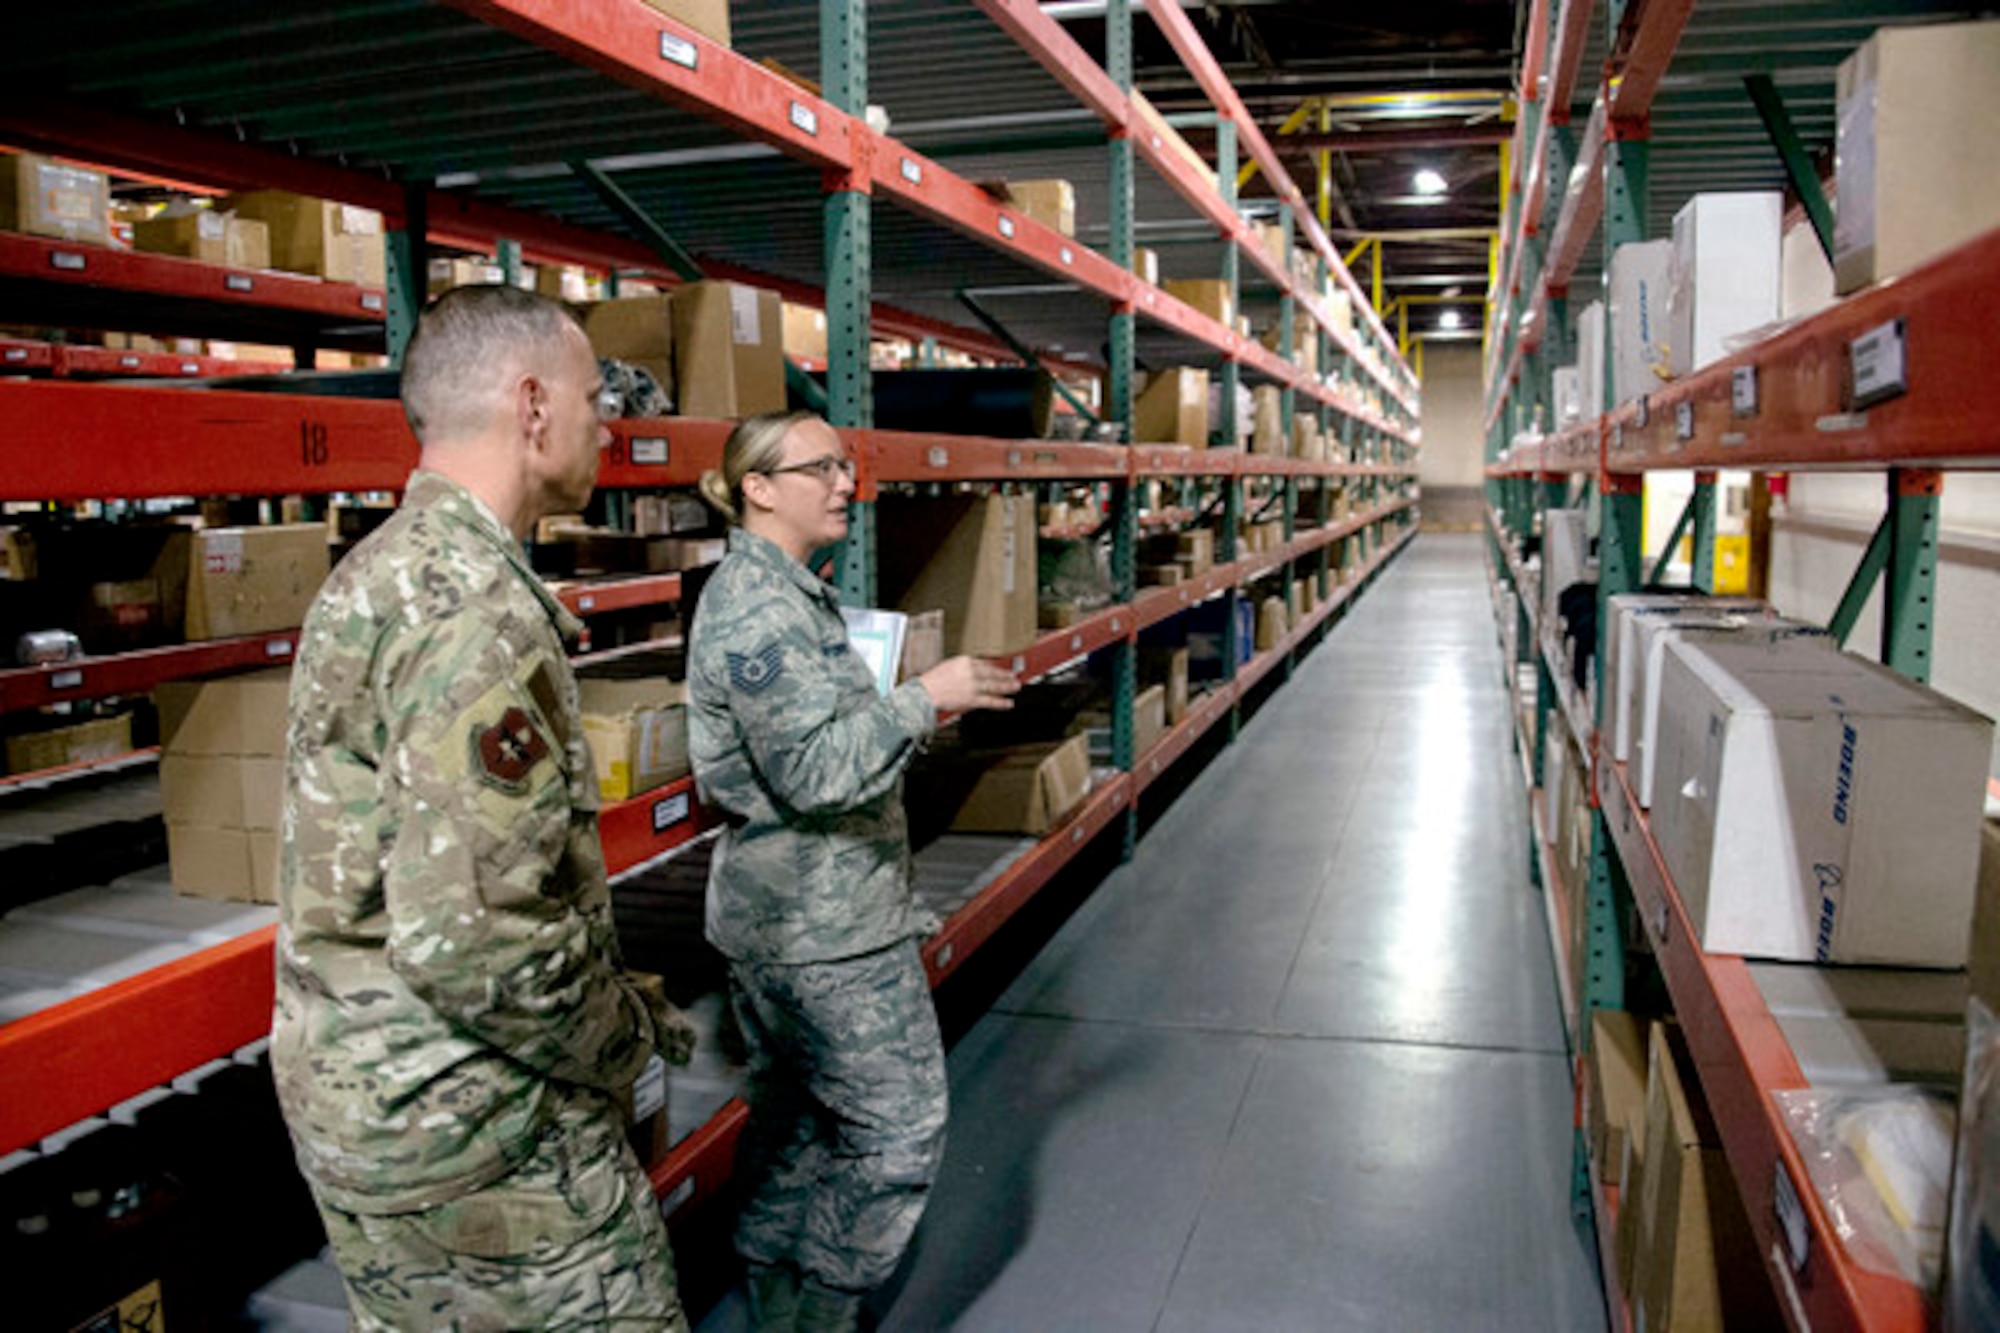 Tech Sgt. Nicole Finnegan, 97th Logistics Readiness Squadron noncommissioned officer in charge of storage, showcases the supply facility to Chief Master Sgt. Erik Thompson, 19th Air Force chief, in March at Altus Air Force Base, Okla. DLA’s Air Force NAM team helps Air Force logisticians obtain equipment and parts for various aircraft. (U.S. Air Force photo by Senior Airman Cody Dow)